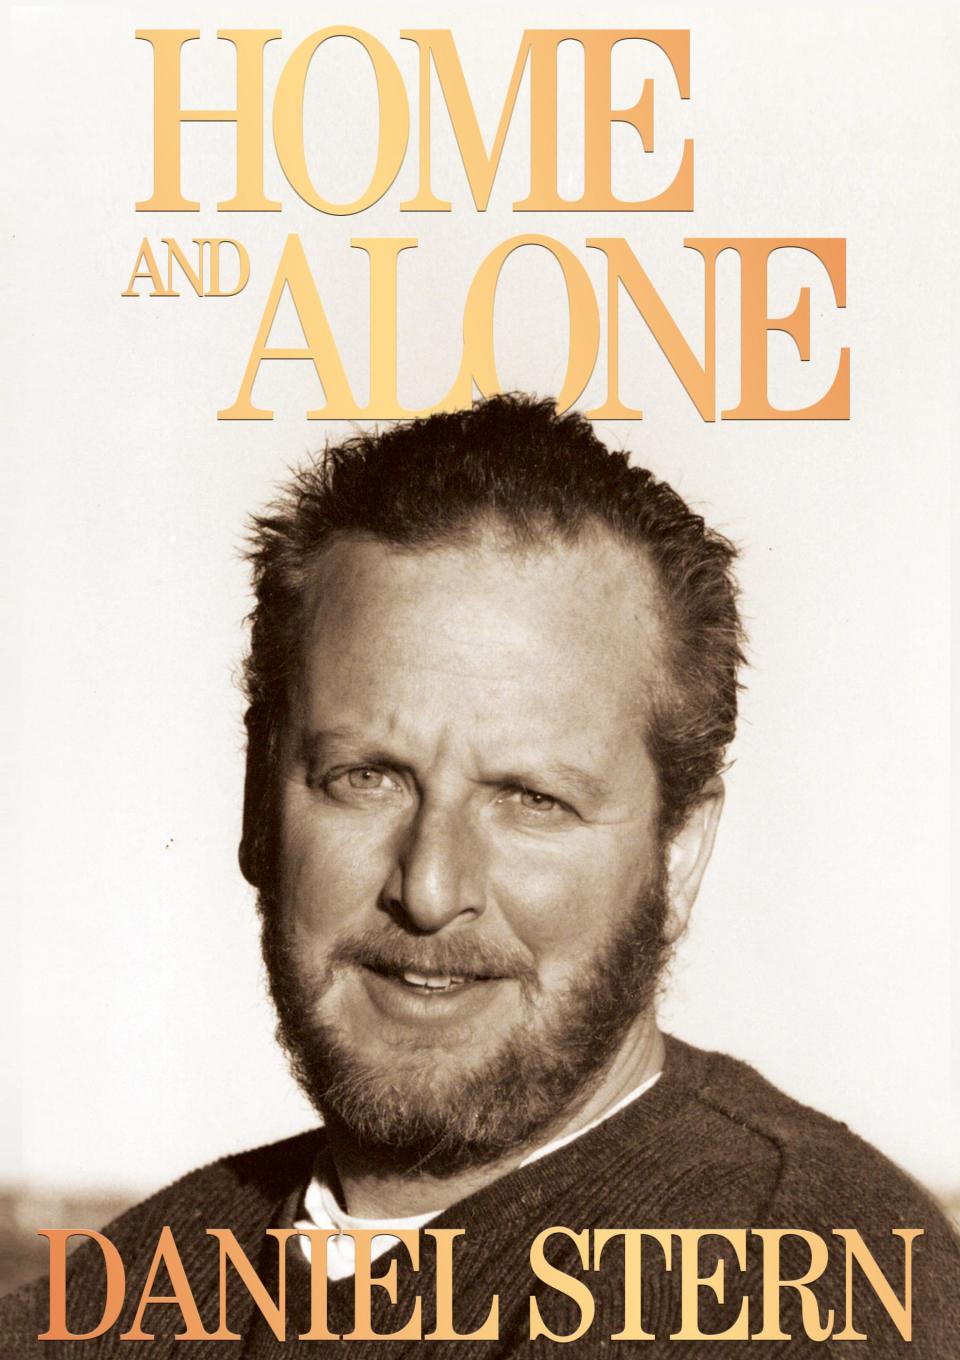 Daniel Stern, celebrated for his role of burglar Marv in the Christmas classic "Home Alone," has written a memoir, "Home and Alone."